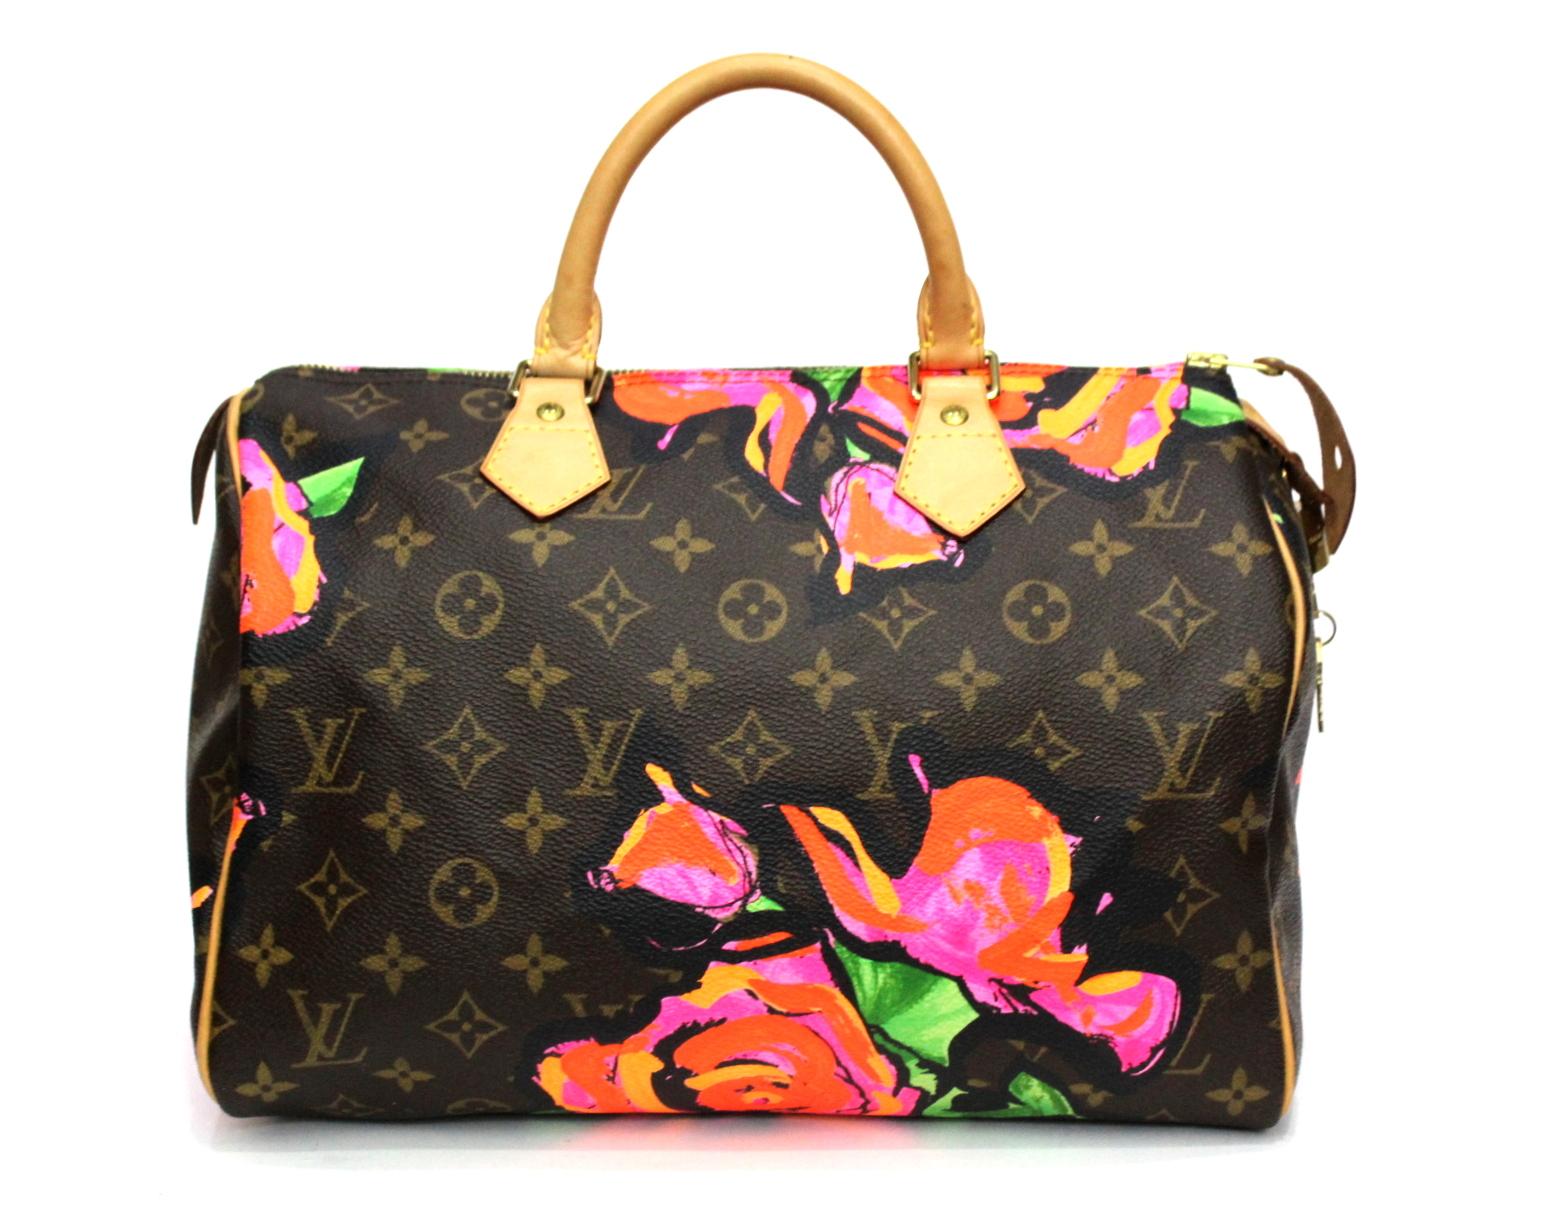 This limited edition Speedy mixes classic Louis Vuitton with Stephen Sprouse’s iconic pop art, making for a unique and creative look. Crafted from monogram canvas, this Louis Vuitton Speedy is accented with bold graffiti style flowers, leather trim